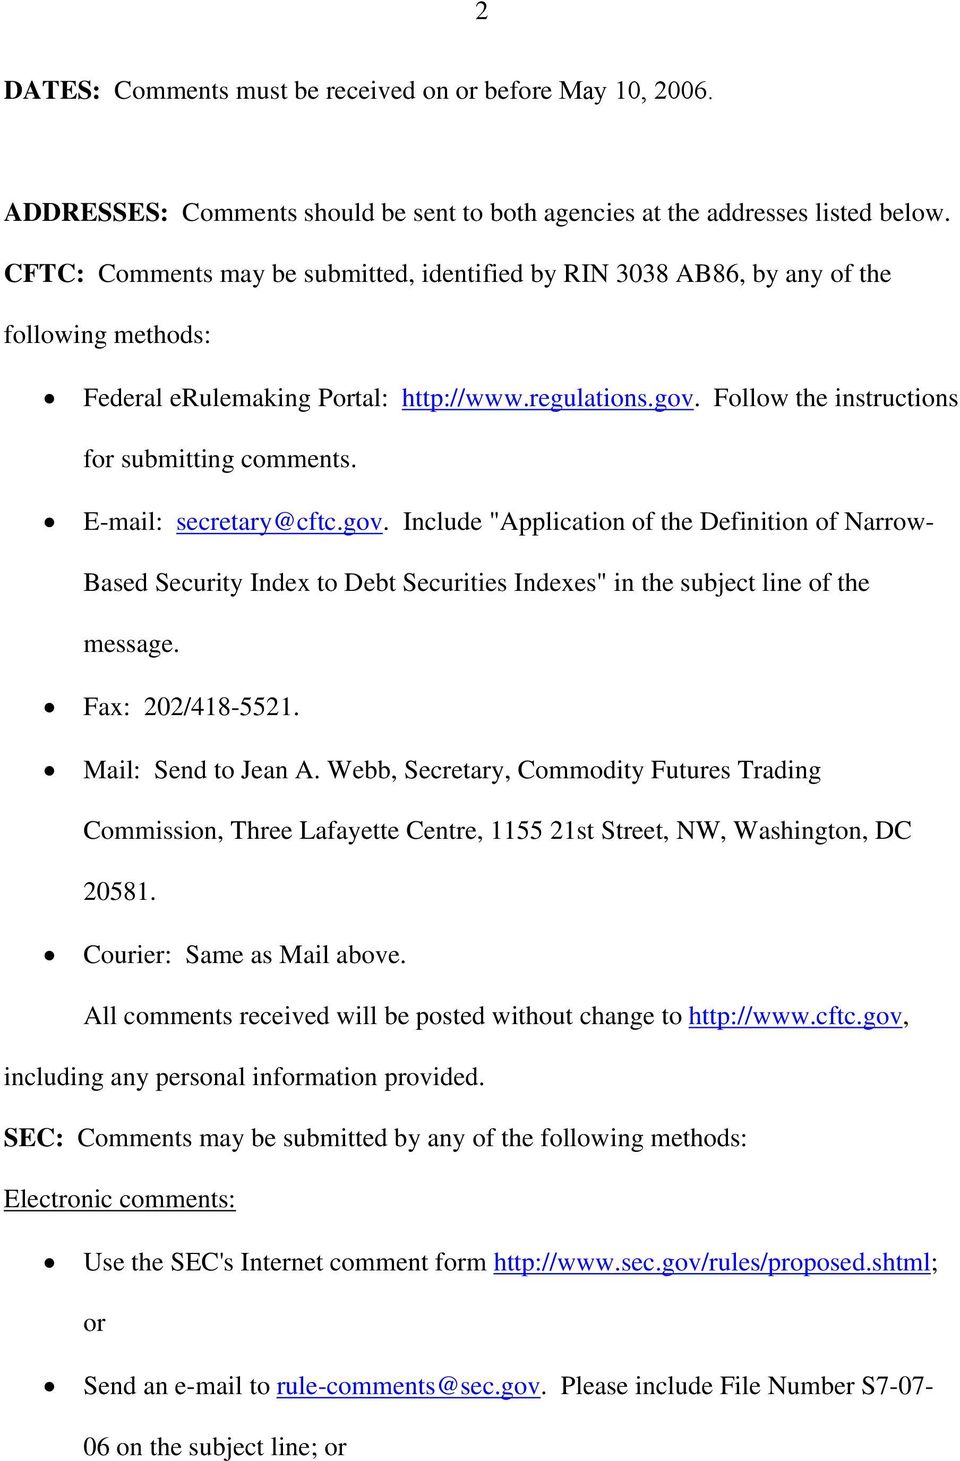 E-mail: secretary@cftc.gov. Include "Application of the Definition of Narrow- Based Security Index to Debt Securities Indexes" in the subject line of the message. Fax: 202/418-5521.